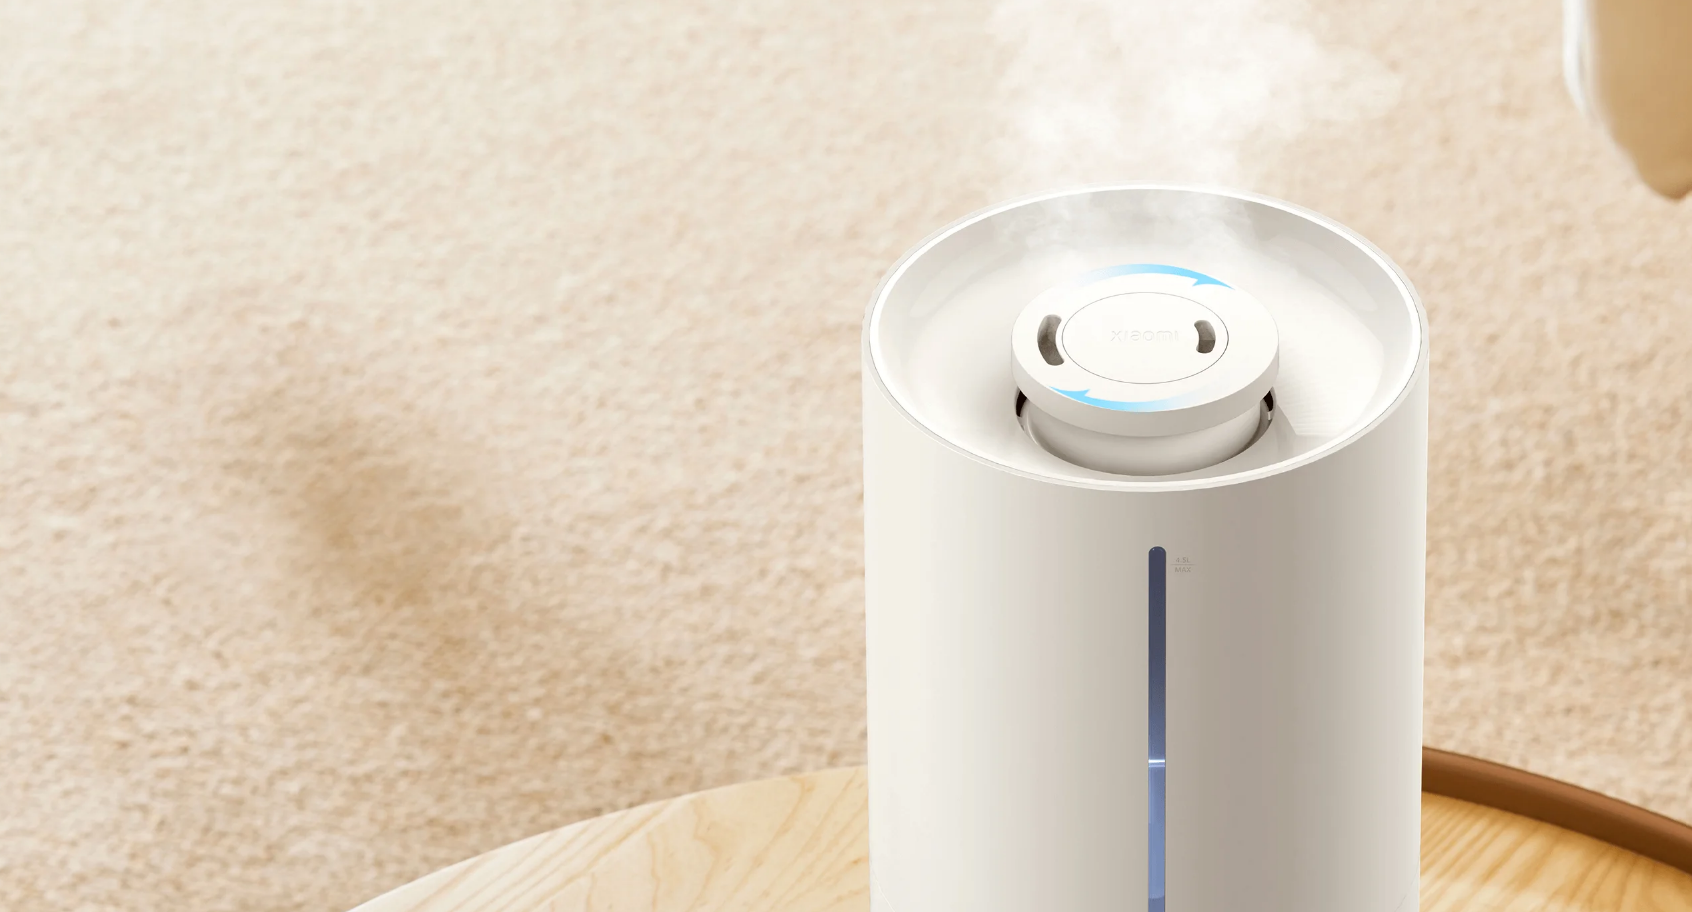 Xiaomi_Smart_Humidifier_2_rotates_360_to_provide_whole-room_coverage_sold_by_Technomobi